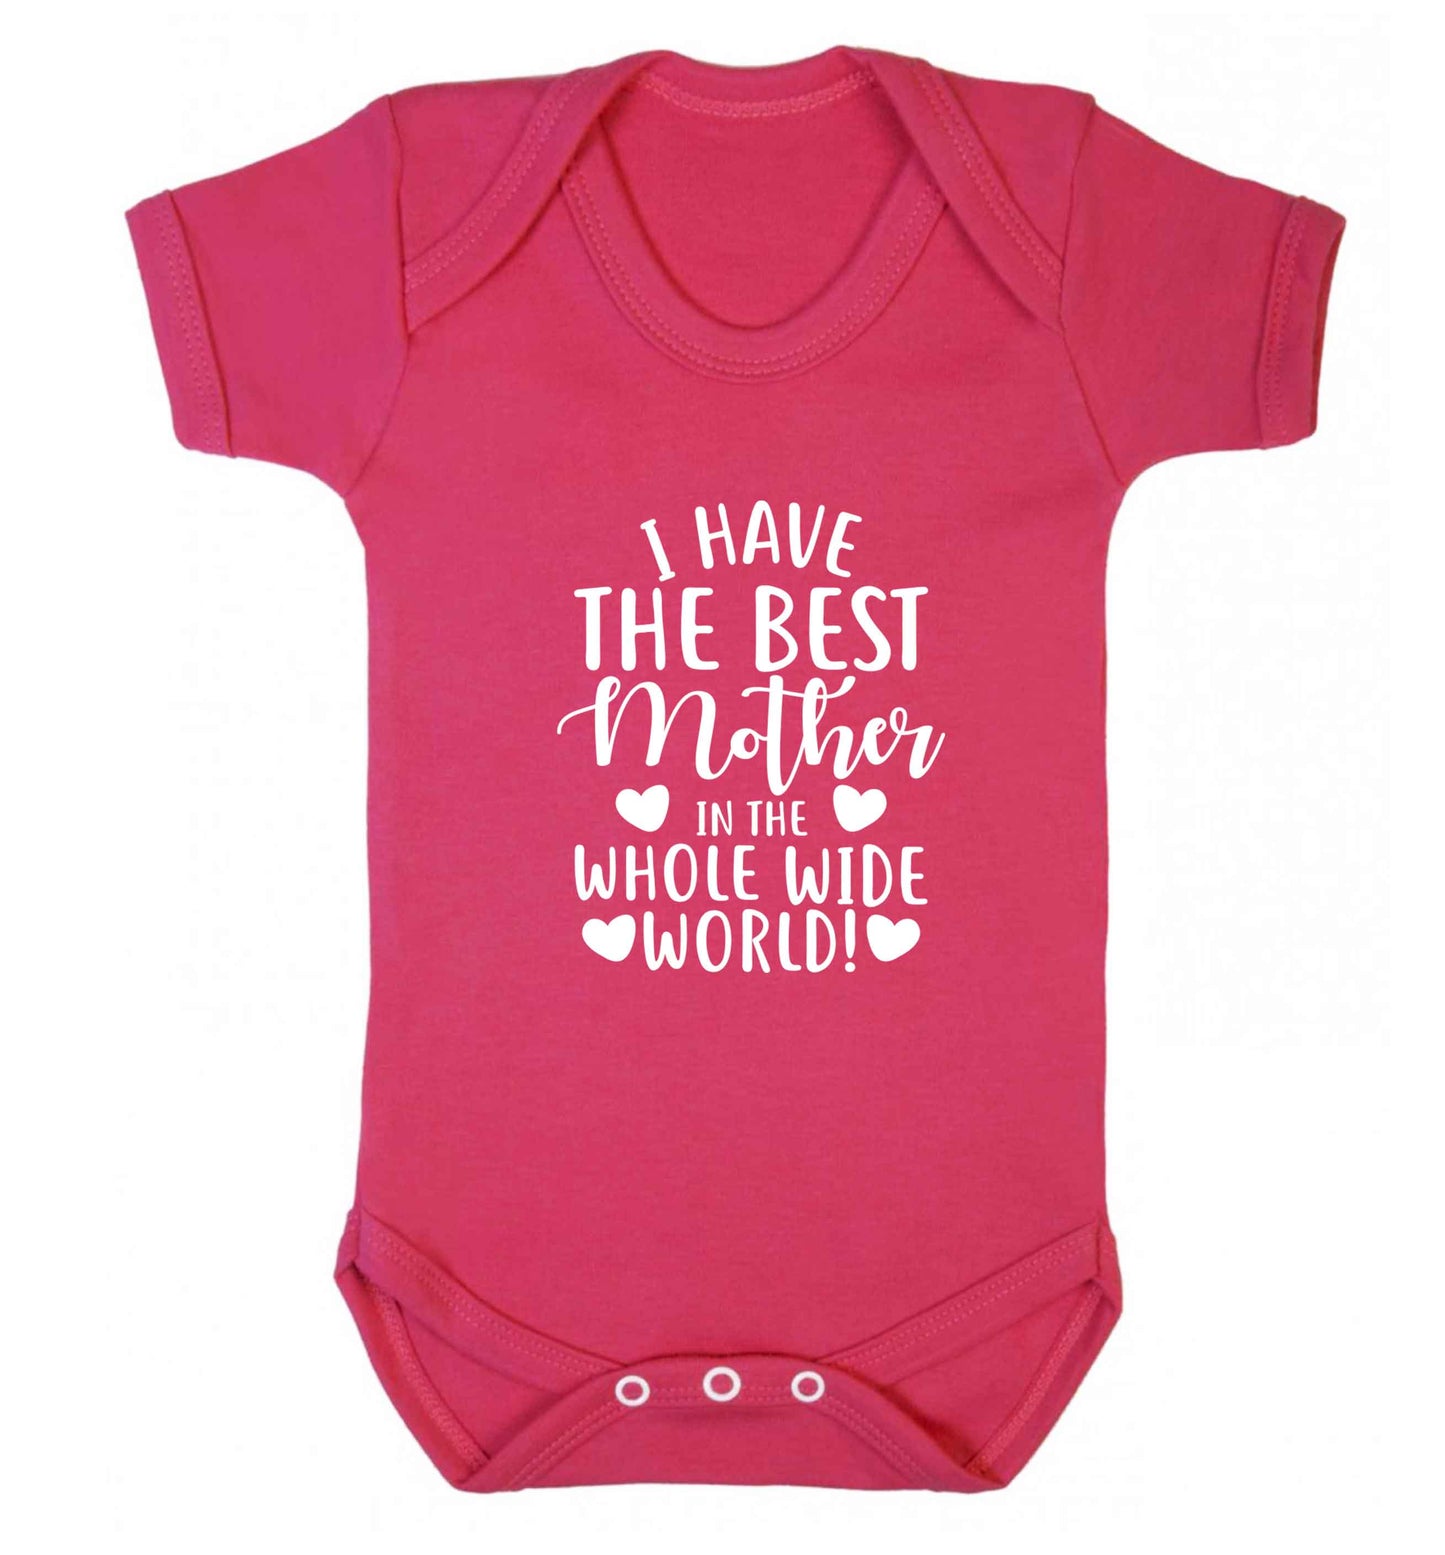 I have the best mother in the whole wide world baby vest dark pink 18-24 months